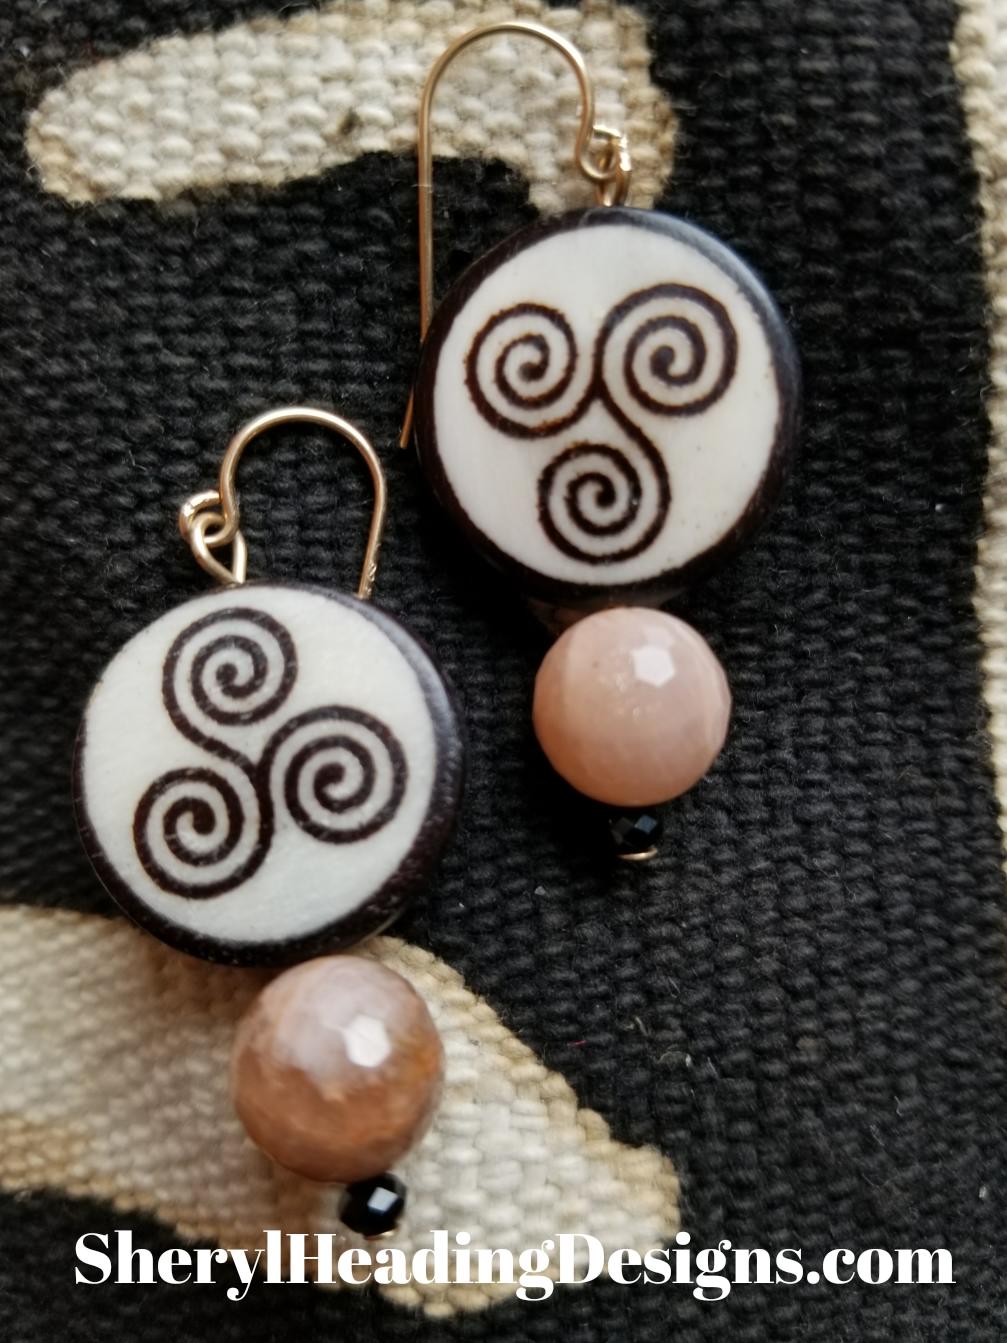 African Swirls Dangle Pierced Earrings With Faceted Semi Precious Stones. - Sheryl Heading Designs